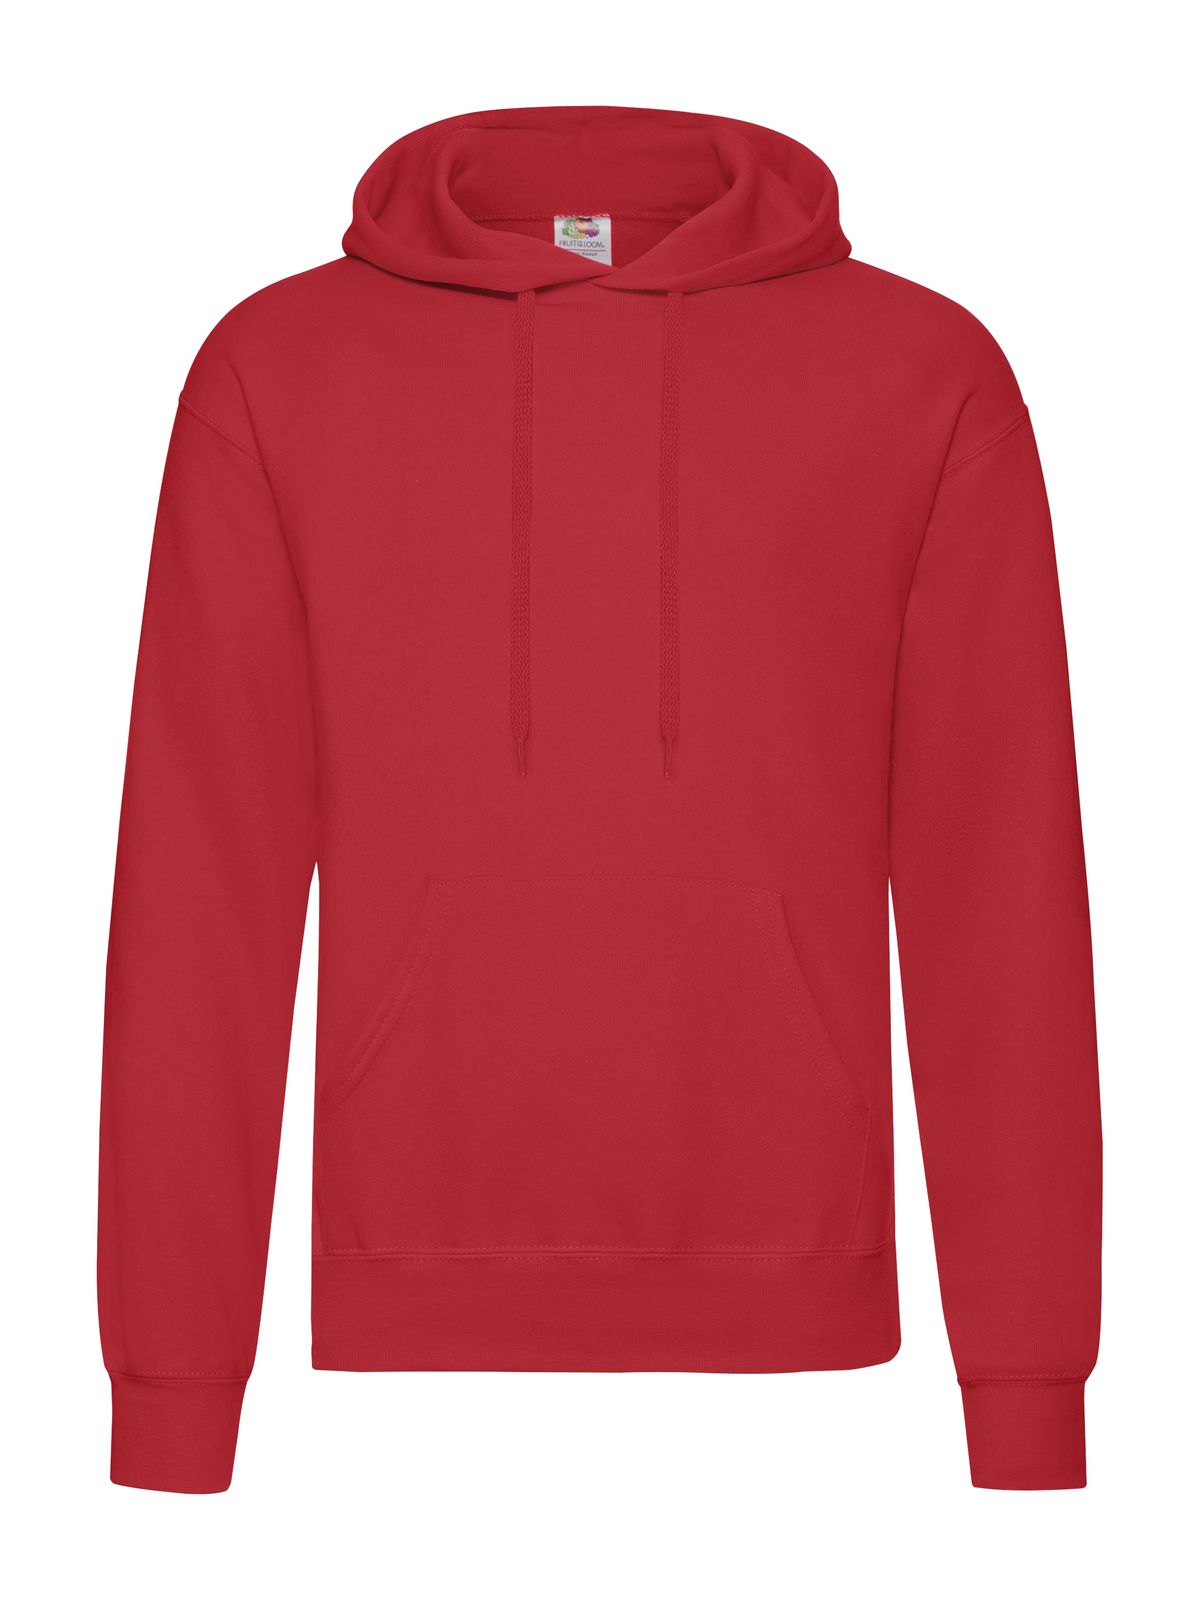 classic-hooded-sweat-red.webp